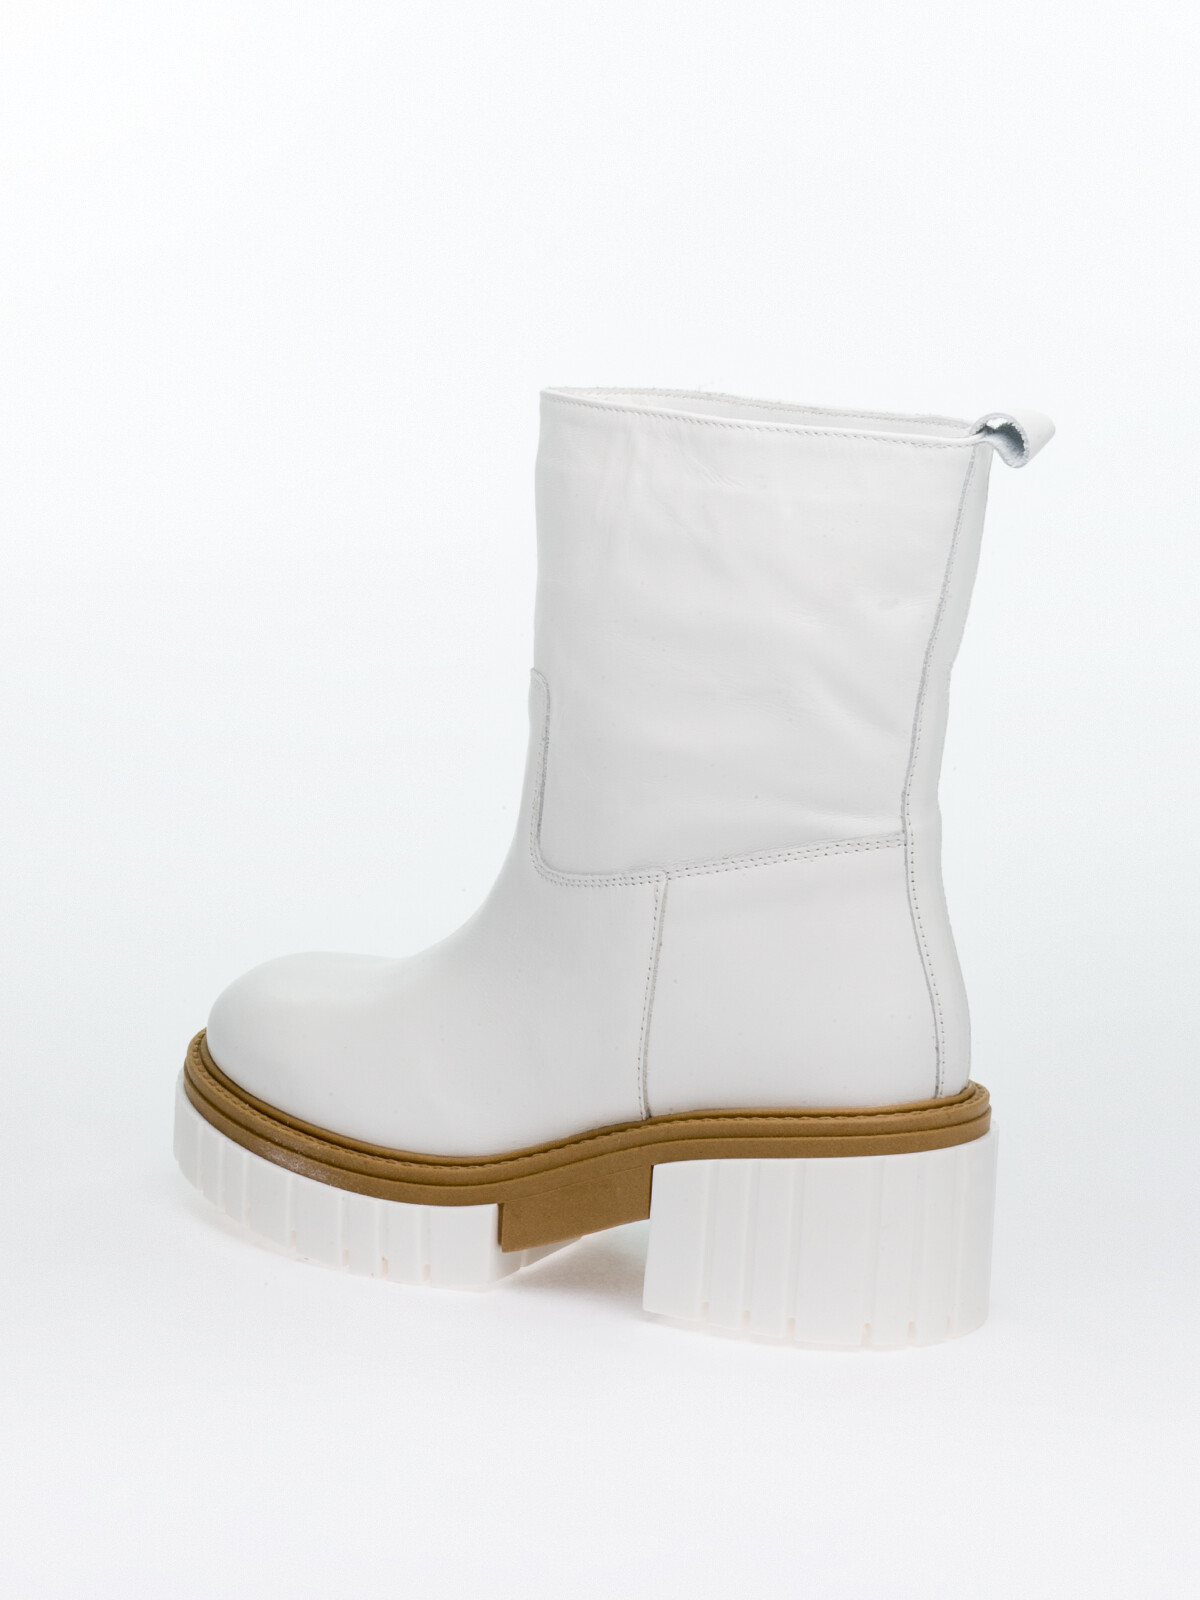 Ankle boot BLANCO